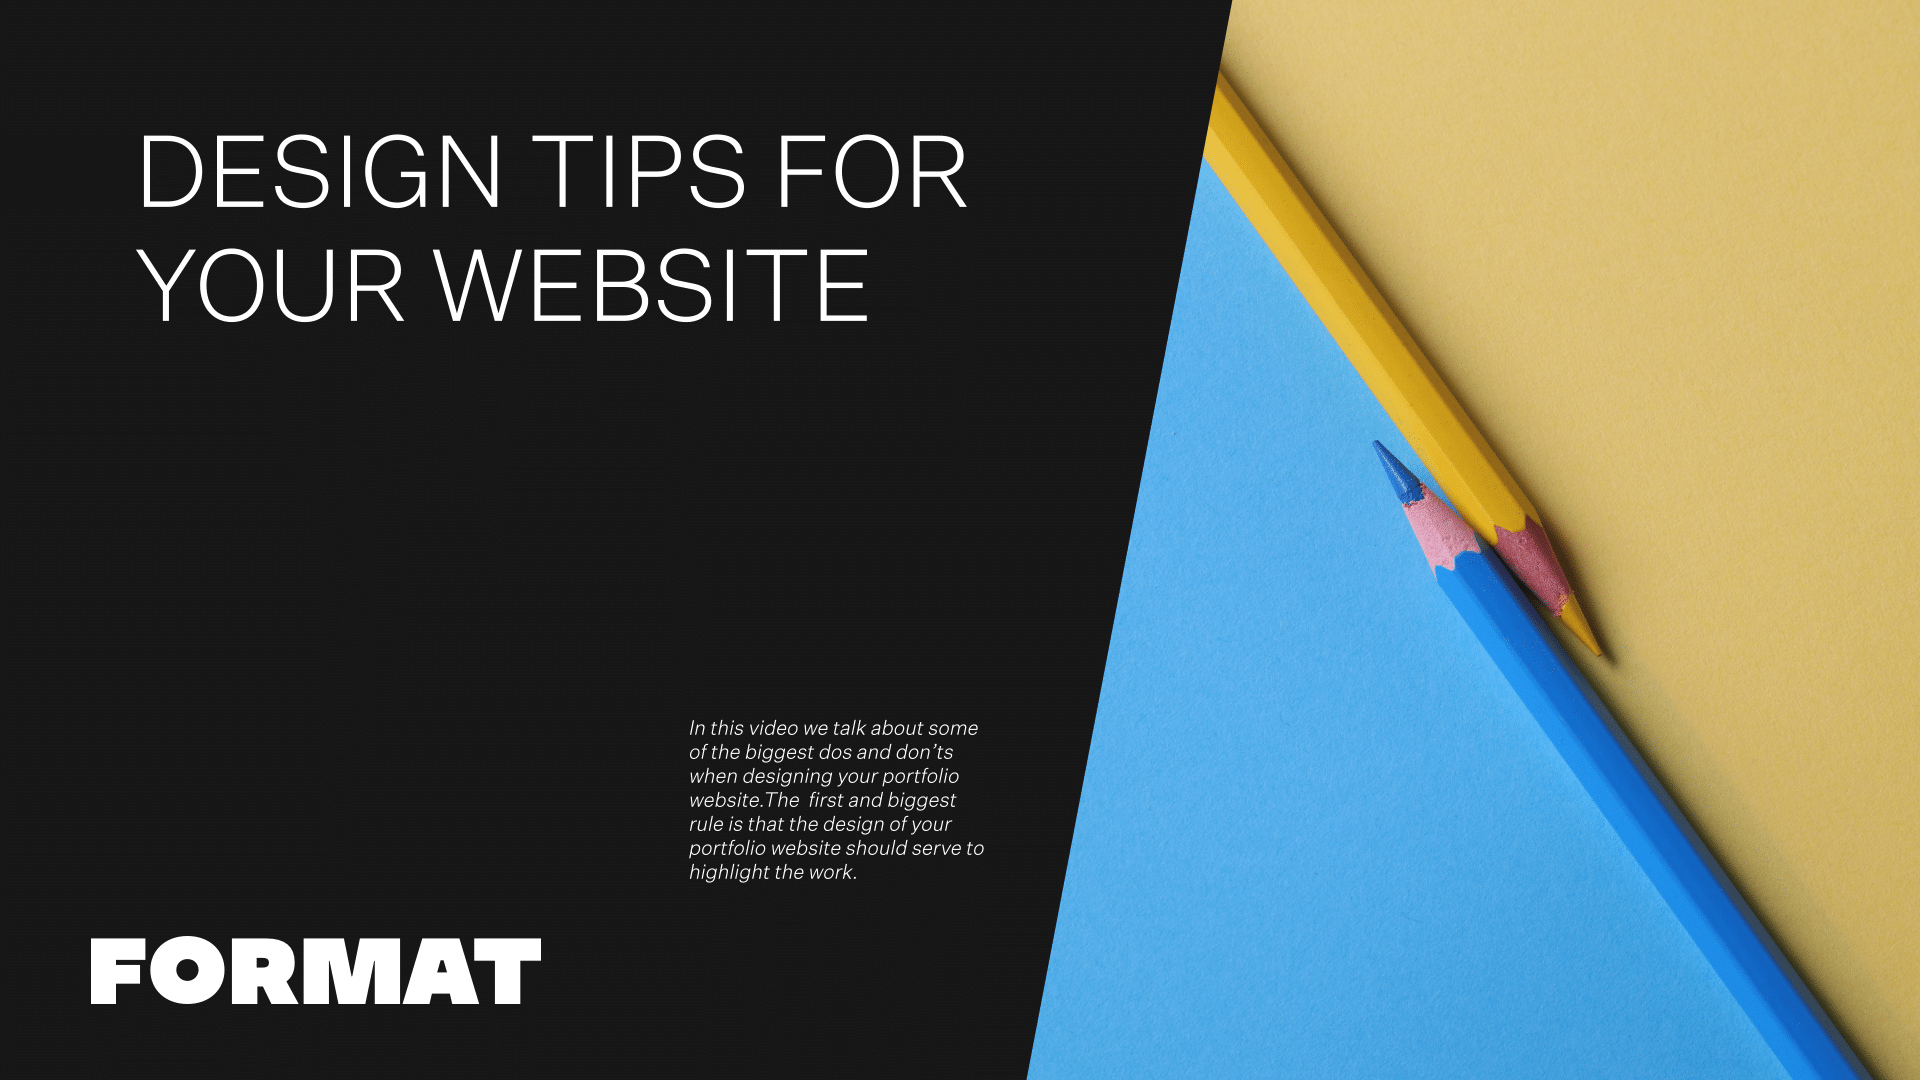 Text in image reads "Design Tips for Your Website" and includes two colored pencils